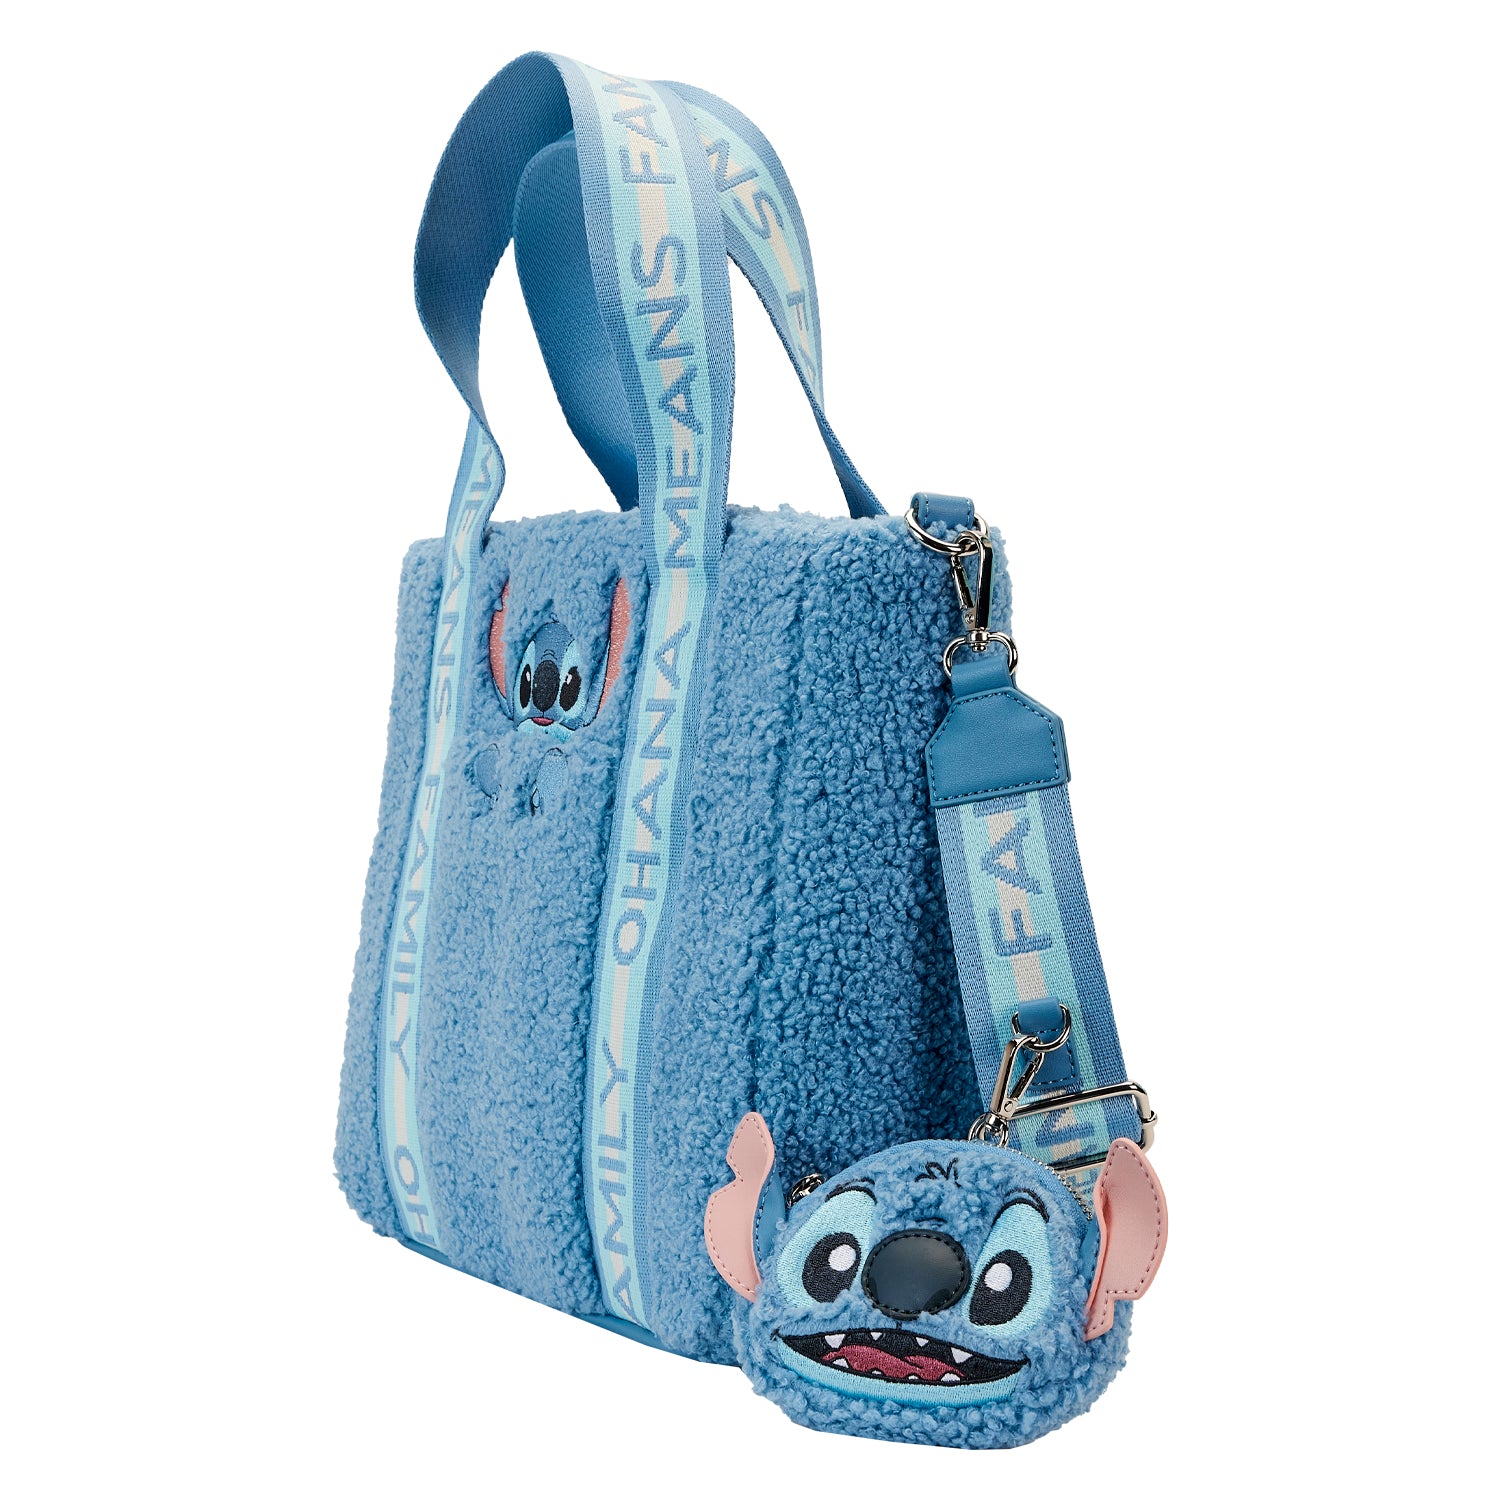 Loungefly x Disney Stitch Plush Tote Bag with coin pouch